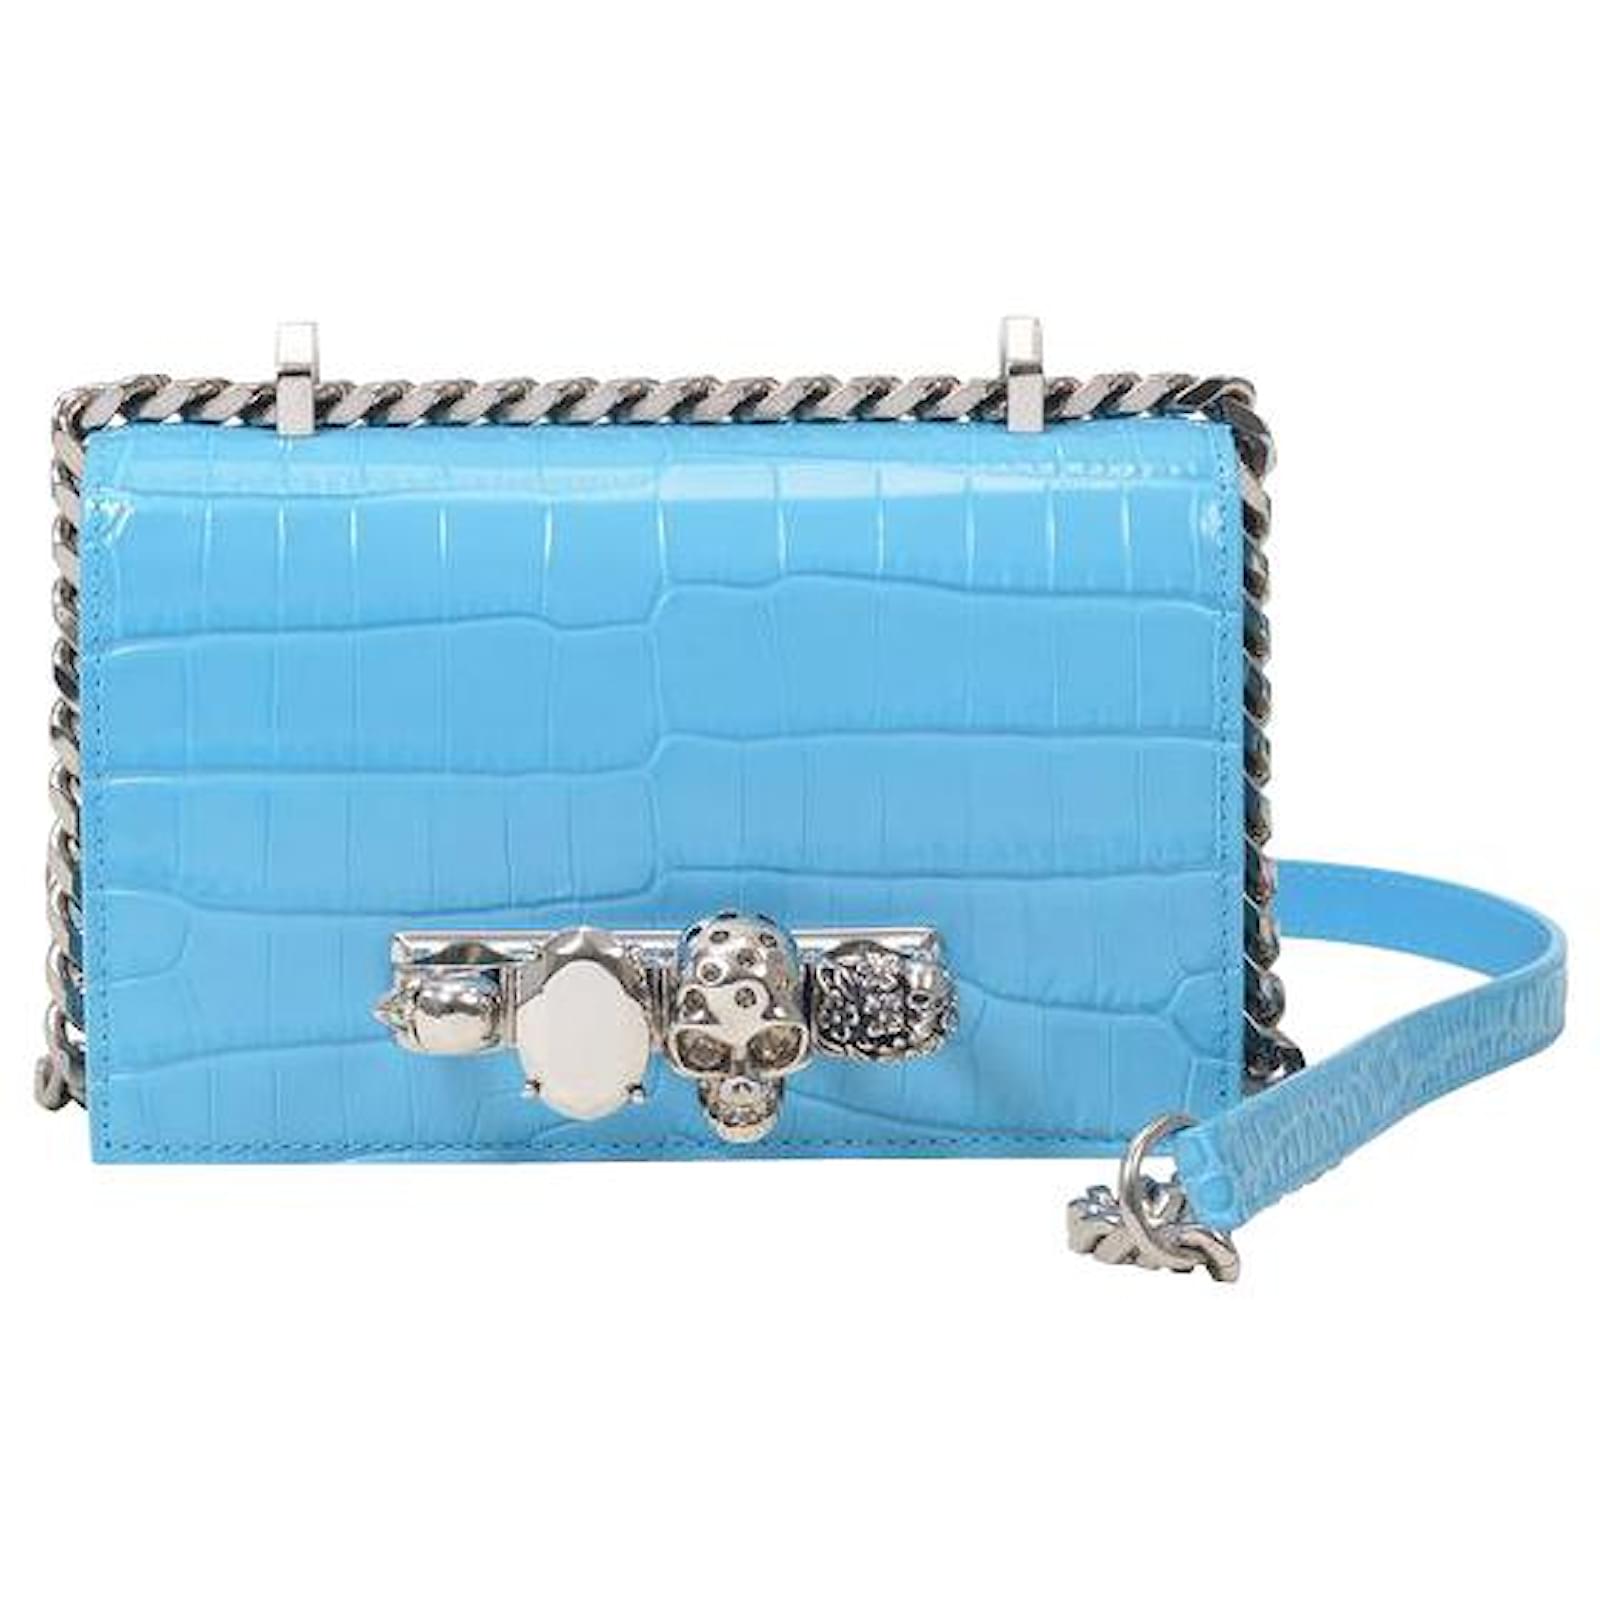 Womens Bags Satchel bags and purses Alexander McQueen Leather Blue Mini Jewelled Satchel 